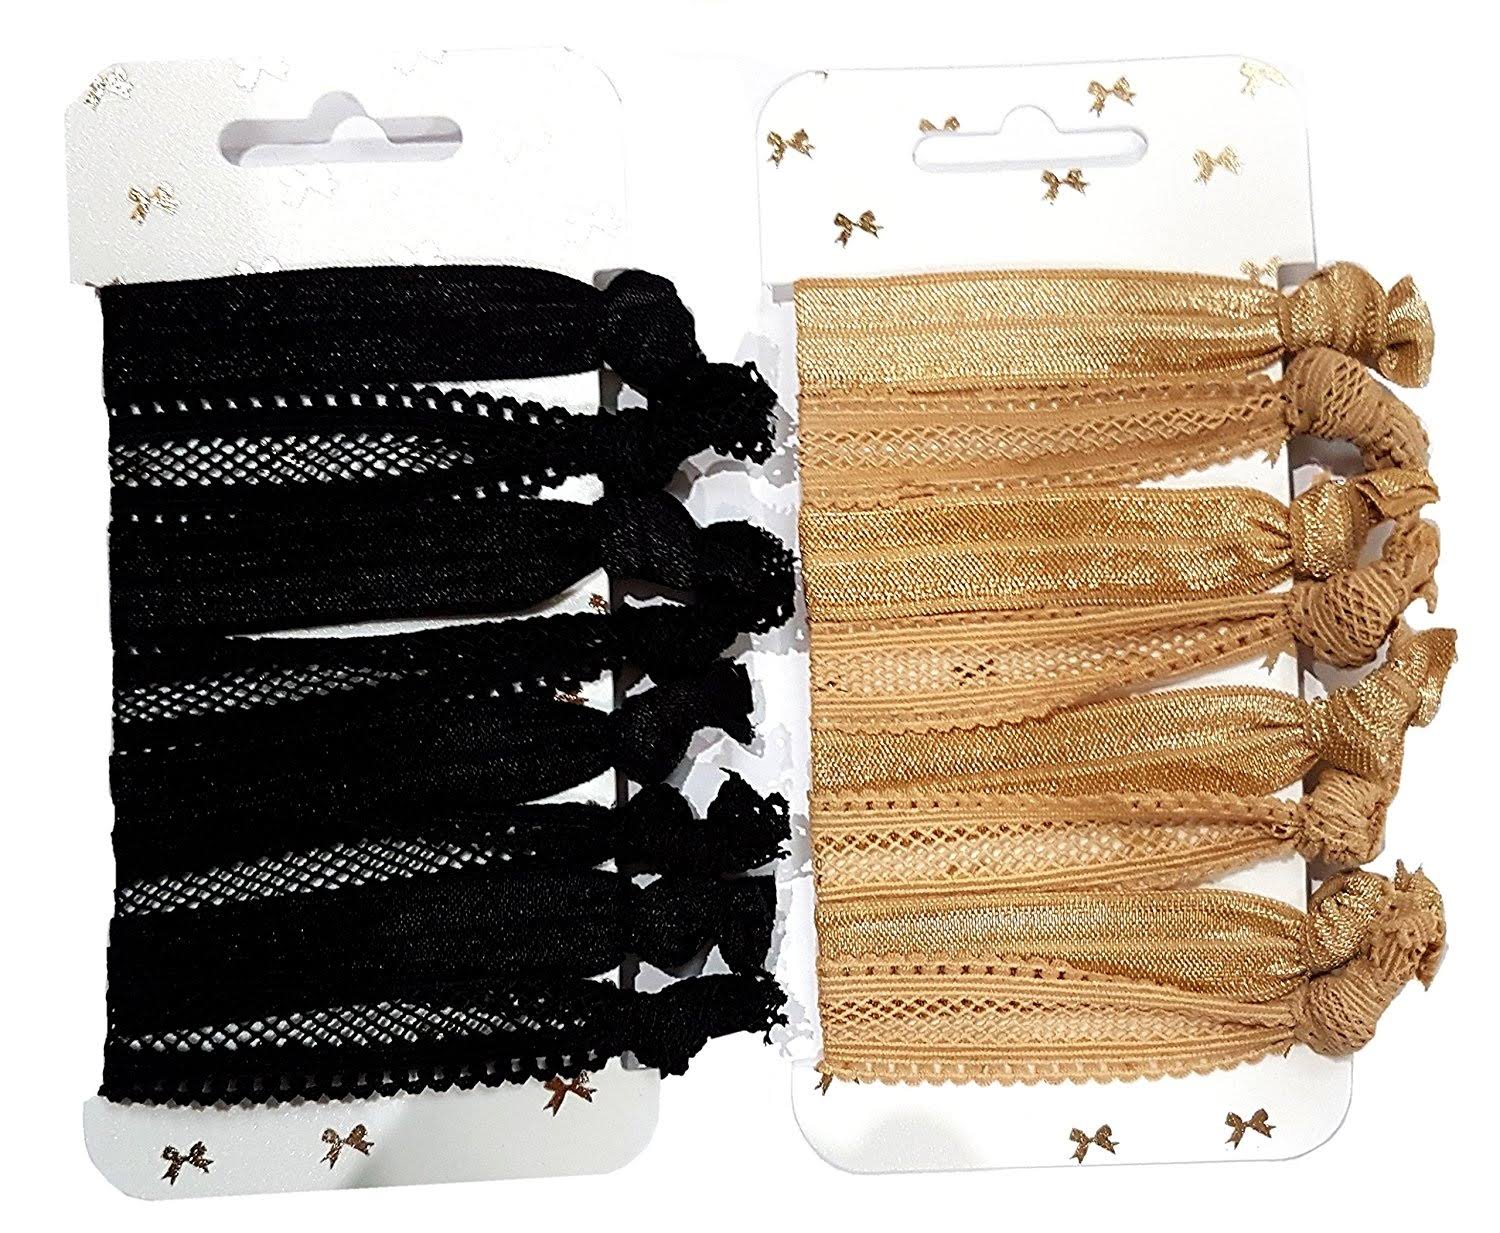 Brand: Emilia Accessories 16 Blonde and Black No Snag Tied Ponytail Holders Elastic Hair Bands (2 Cards)